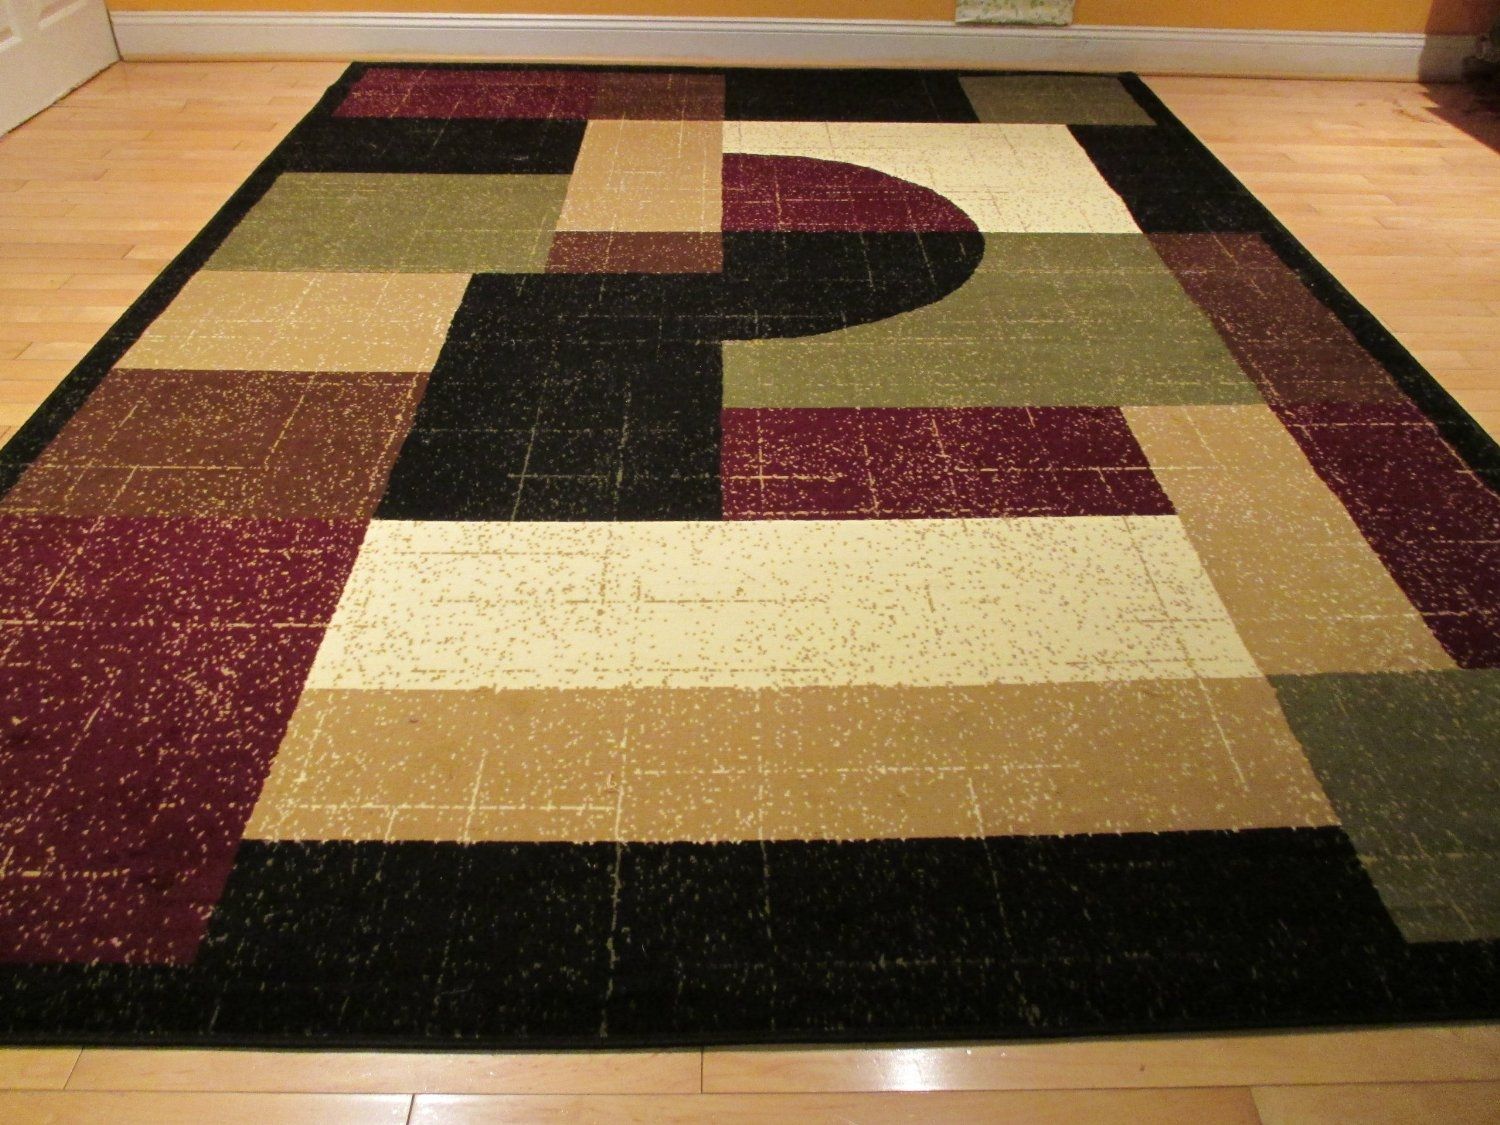 52 Area Carpets Choosing The Contemporary Area Rugs For Your Home With Regard To Large Wool Area Rugs (View 11 of 15)